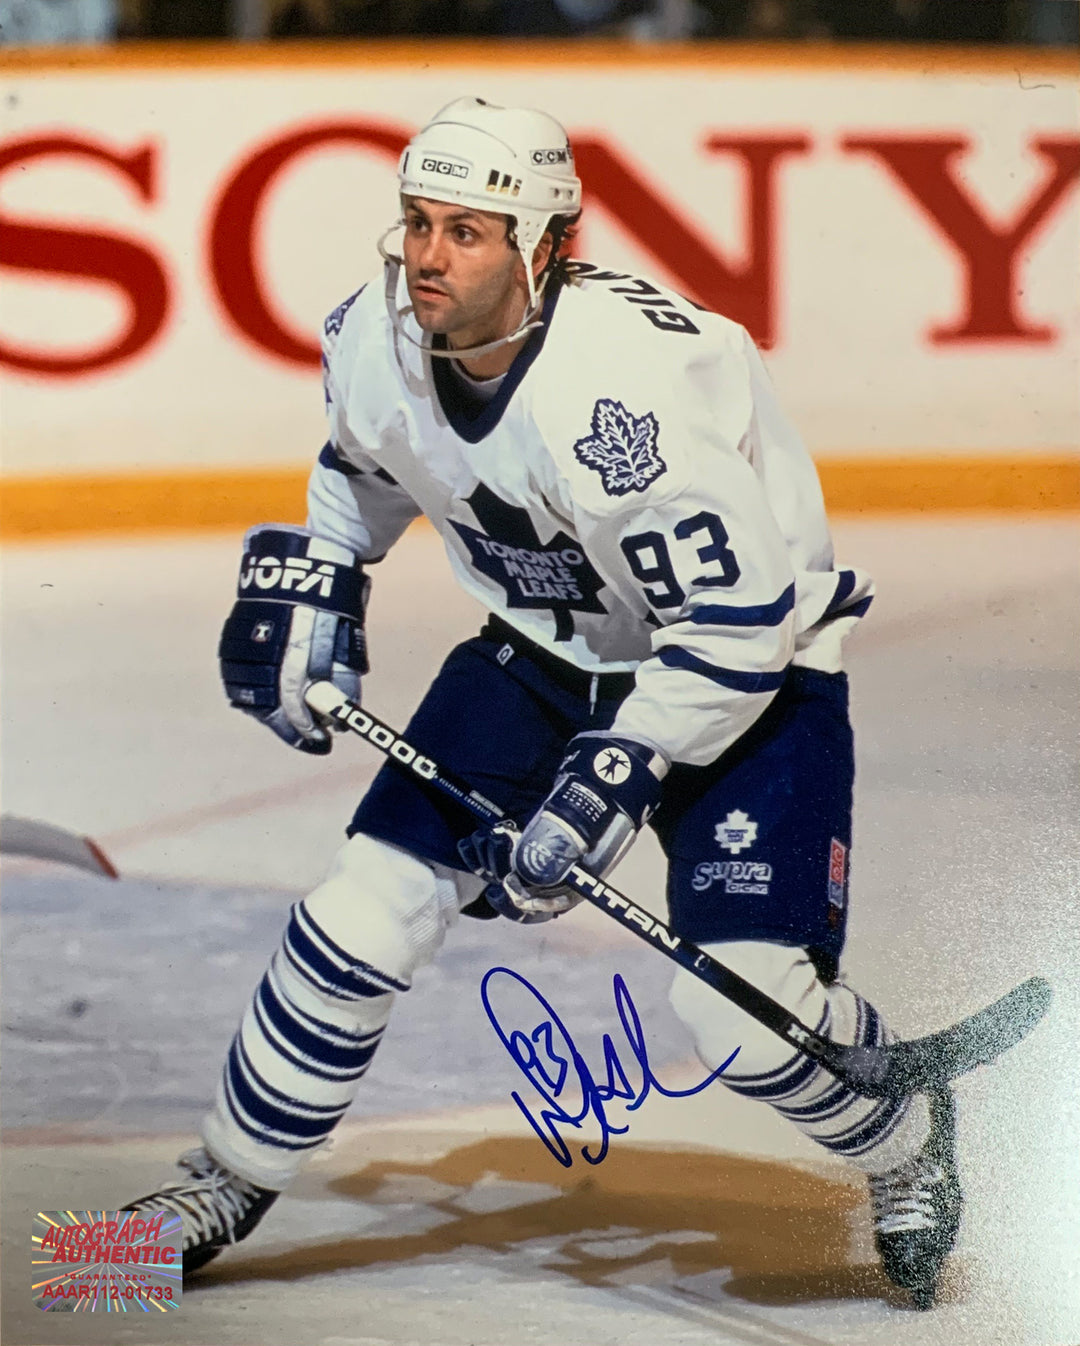 Doug Gilmour Signed 8X10 Toronto Maple Leafs Photo - White, Toronto Maple Leafs, NHL, Hockey, Autographed, Signed, AAHPH30265